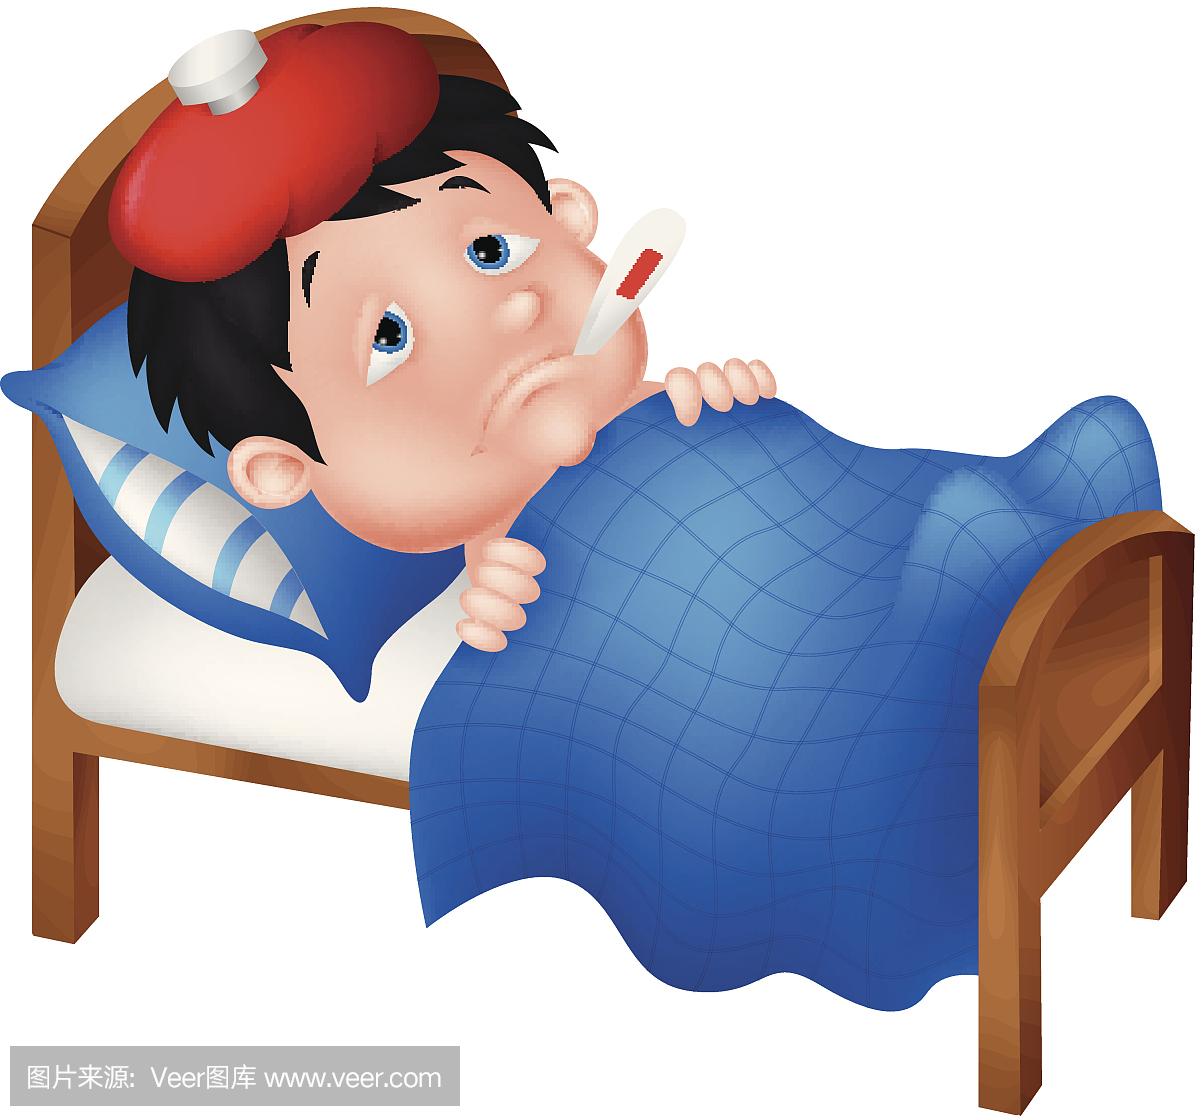 Girl Sitting On Bed Cartoon Clipart